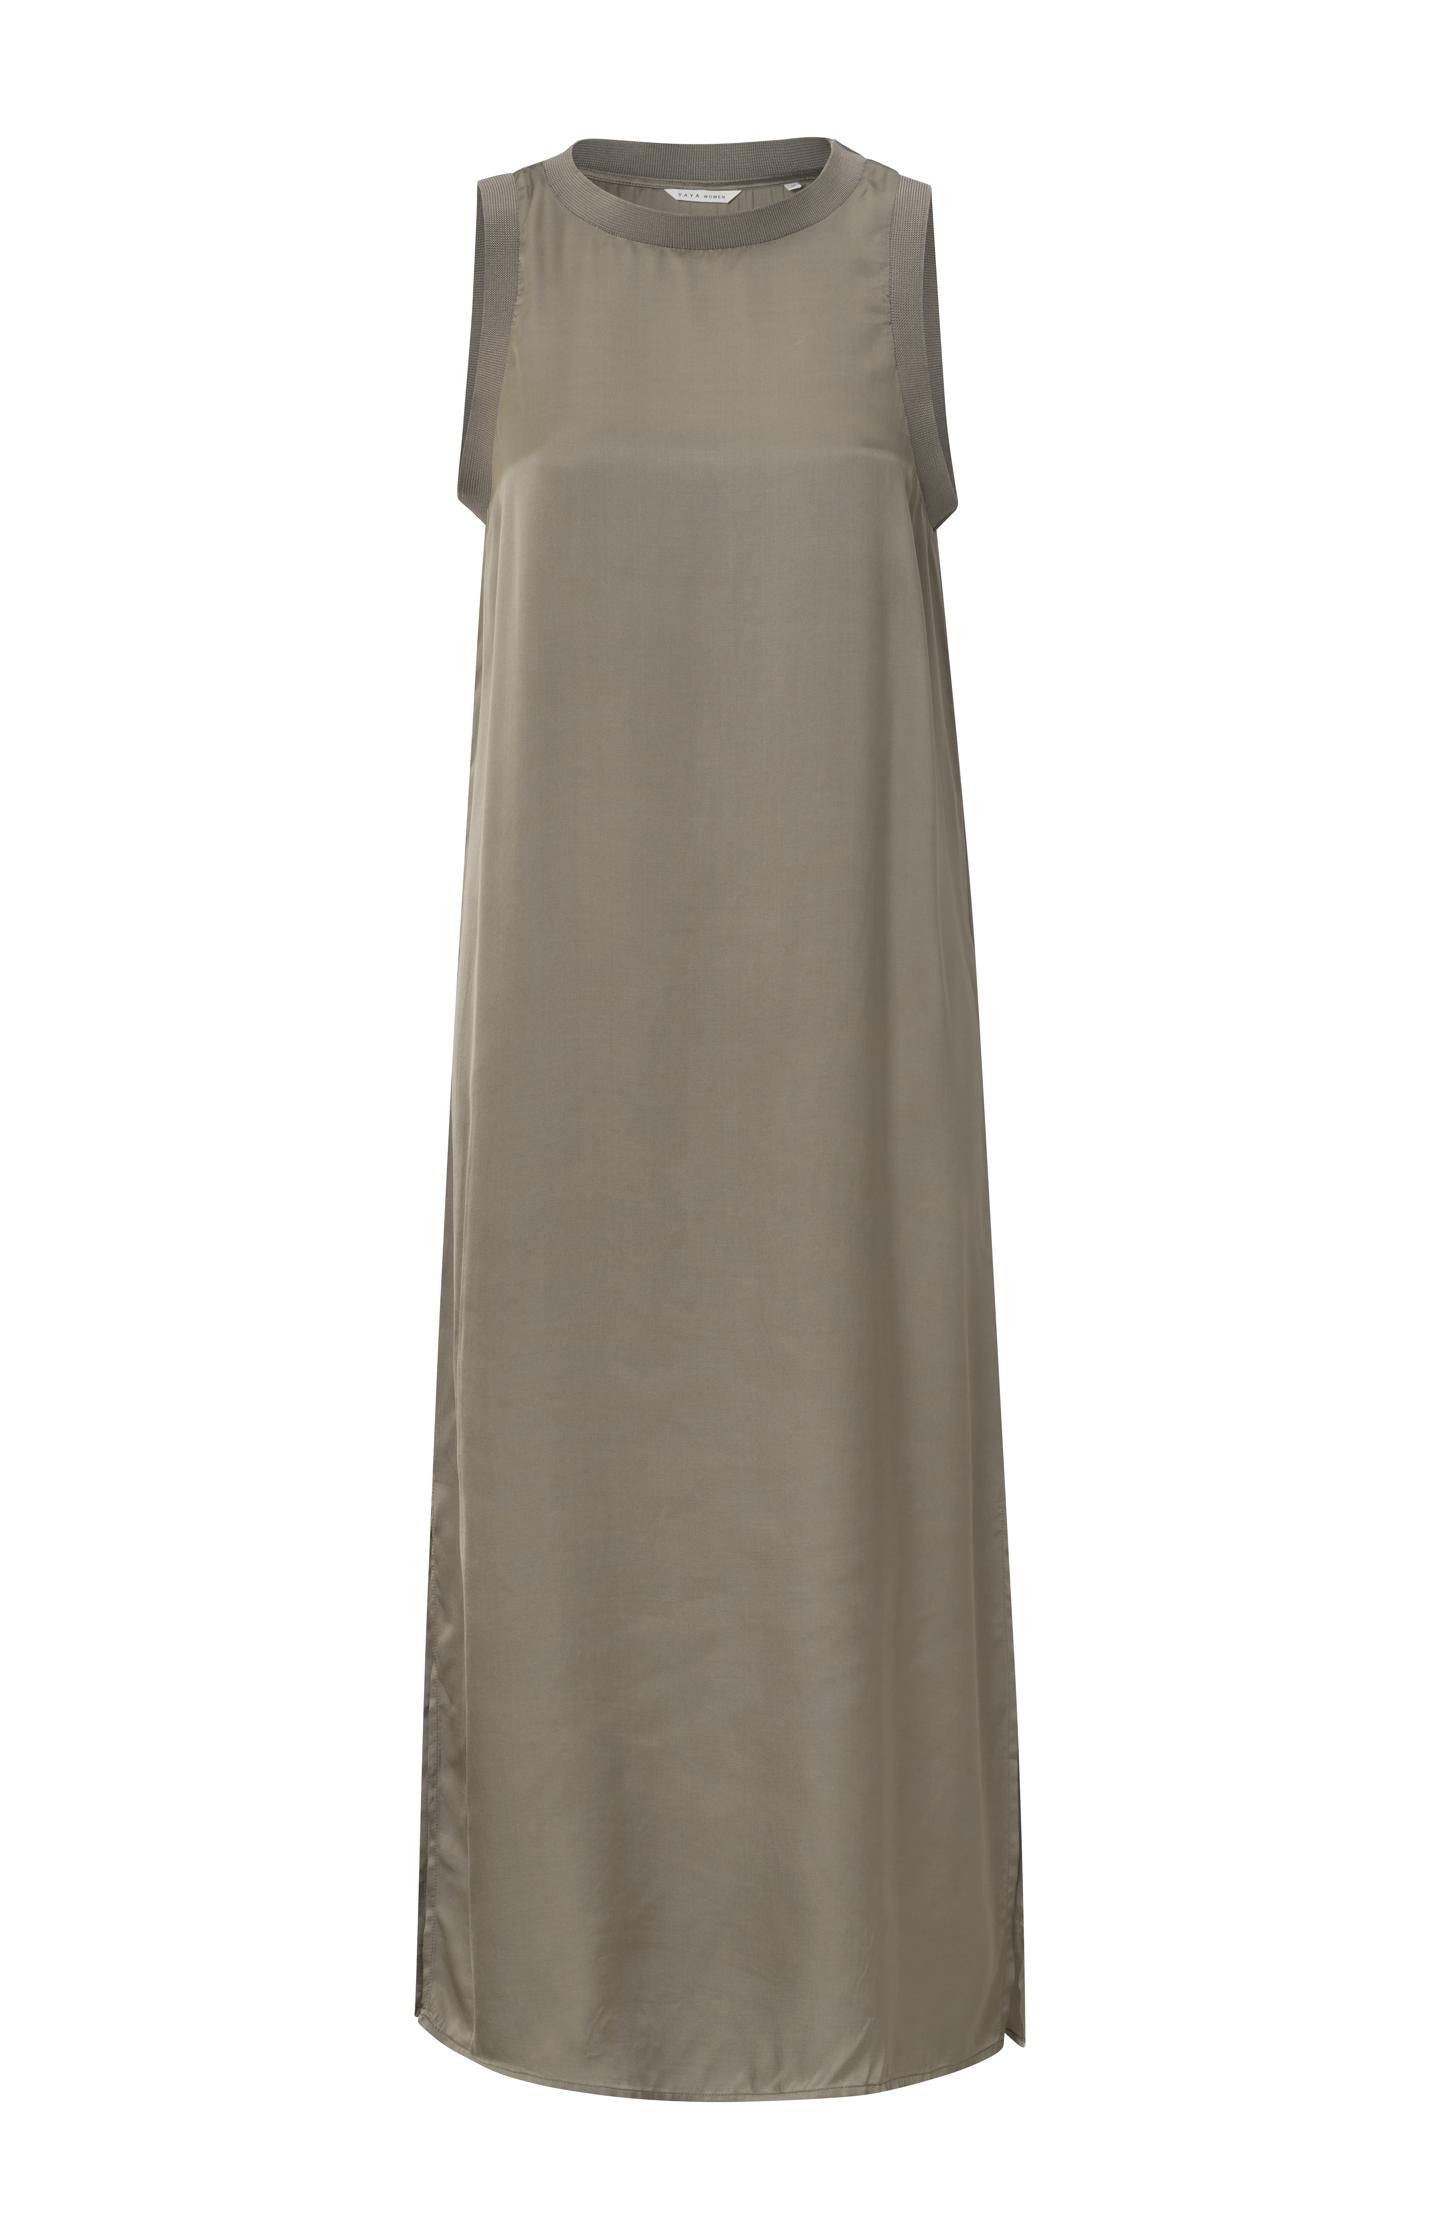 Satin sleeveless dress with ribbed detail - Type: product